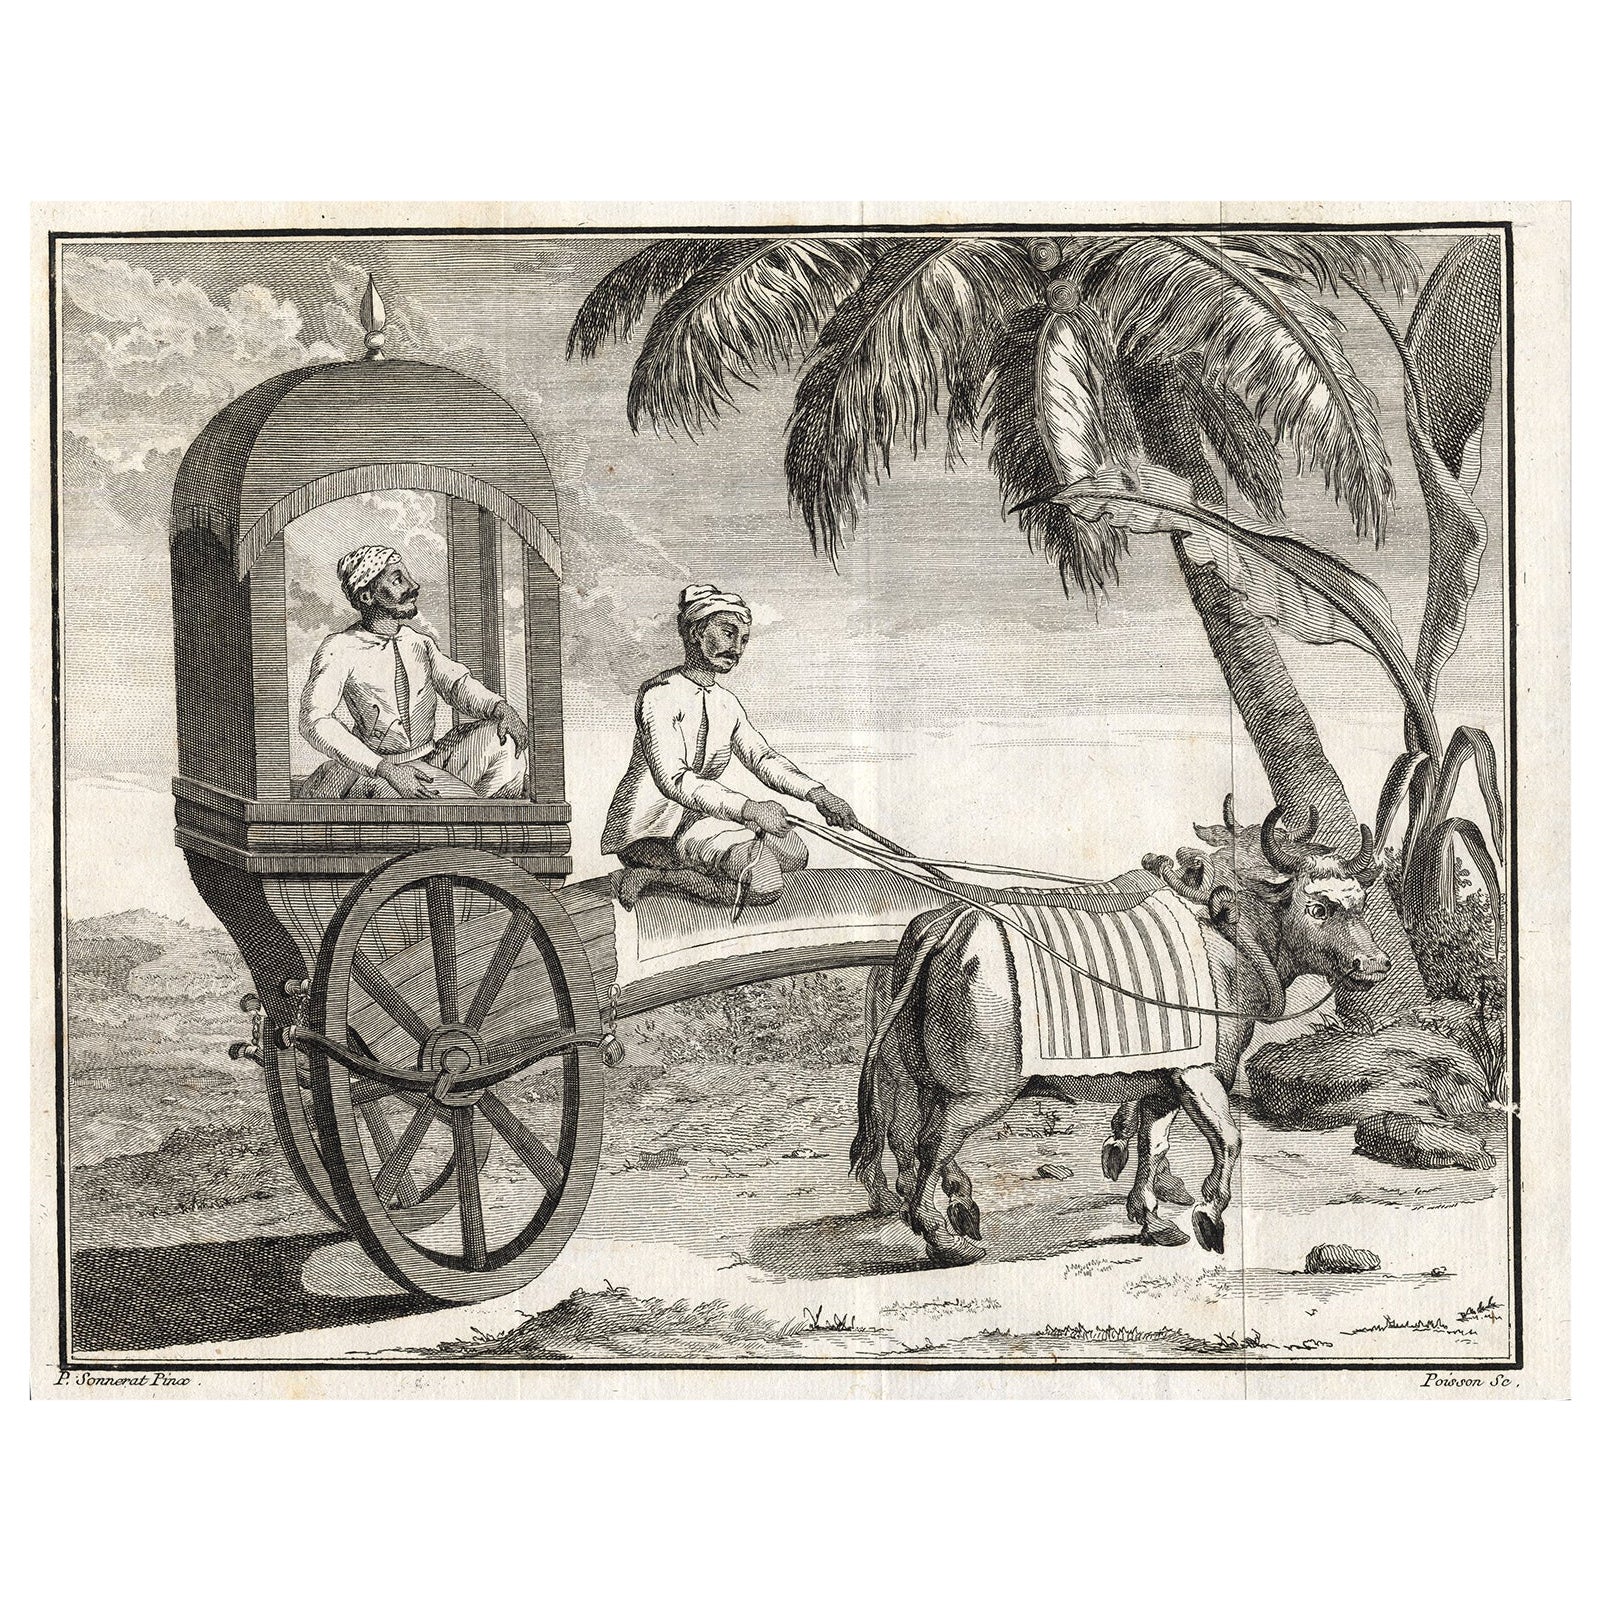 Old Print of an Oriental Man in a Small Carriage Pulled by Oxen, 1782